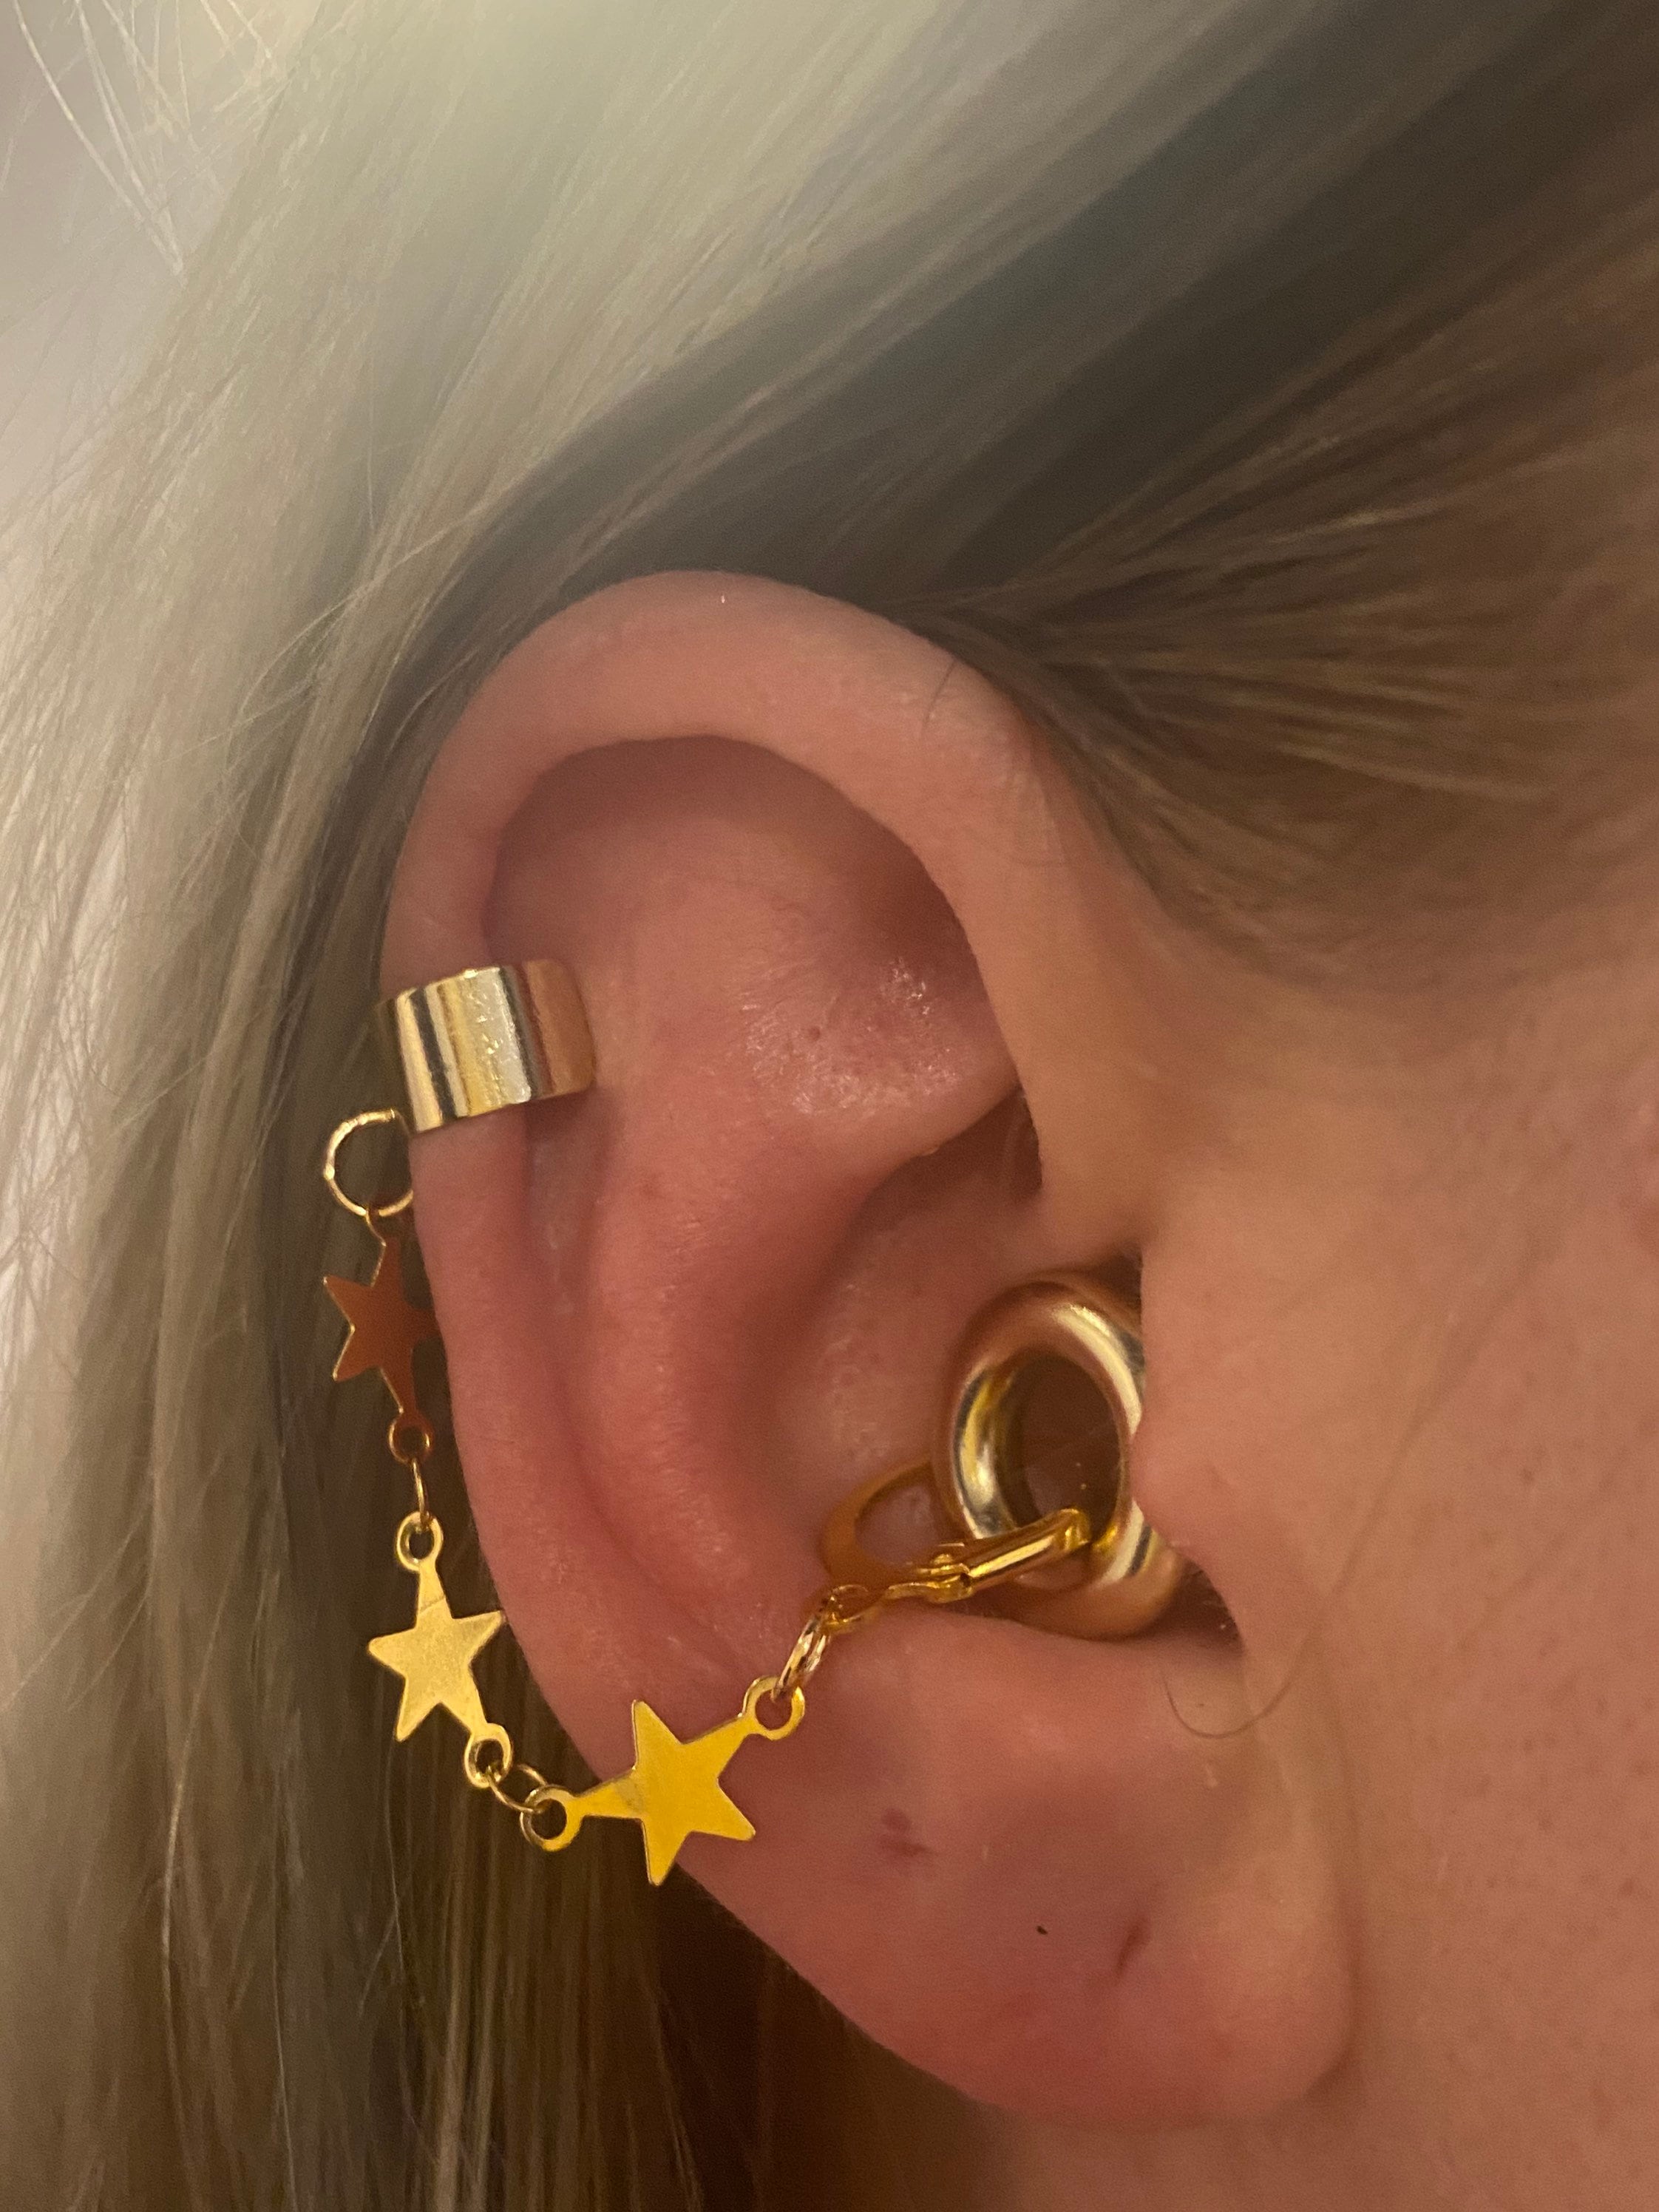 Loop Earplugs Review: Hearing Protection That Looks Like Jewelry